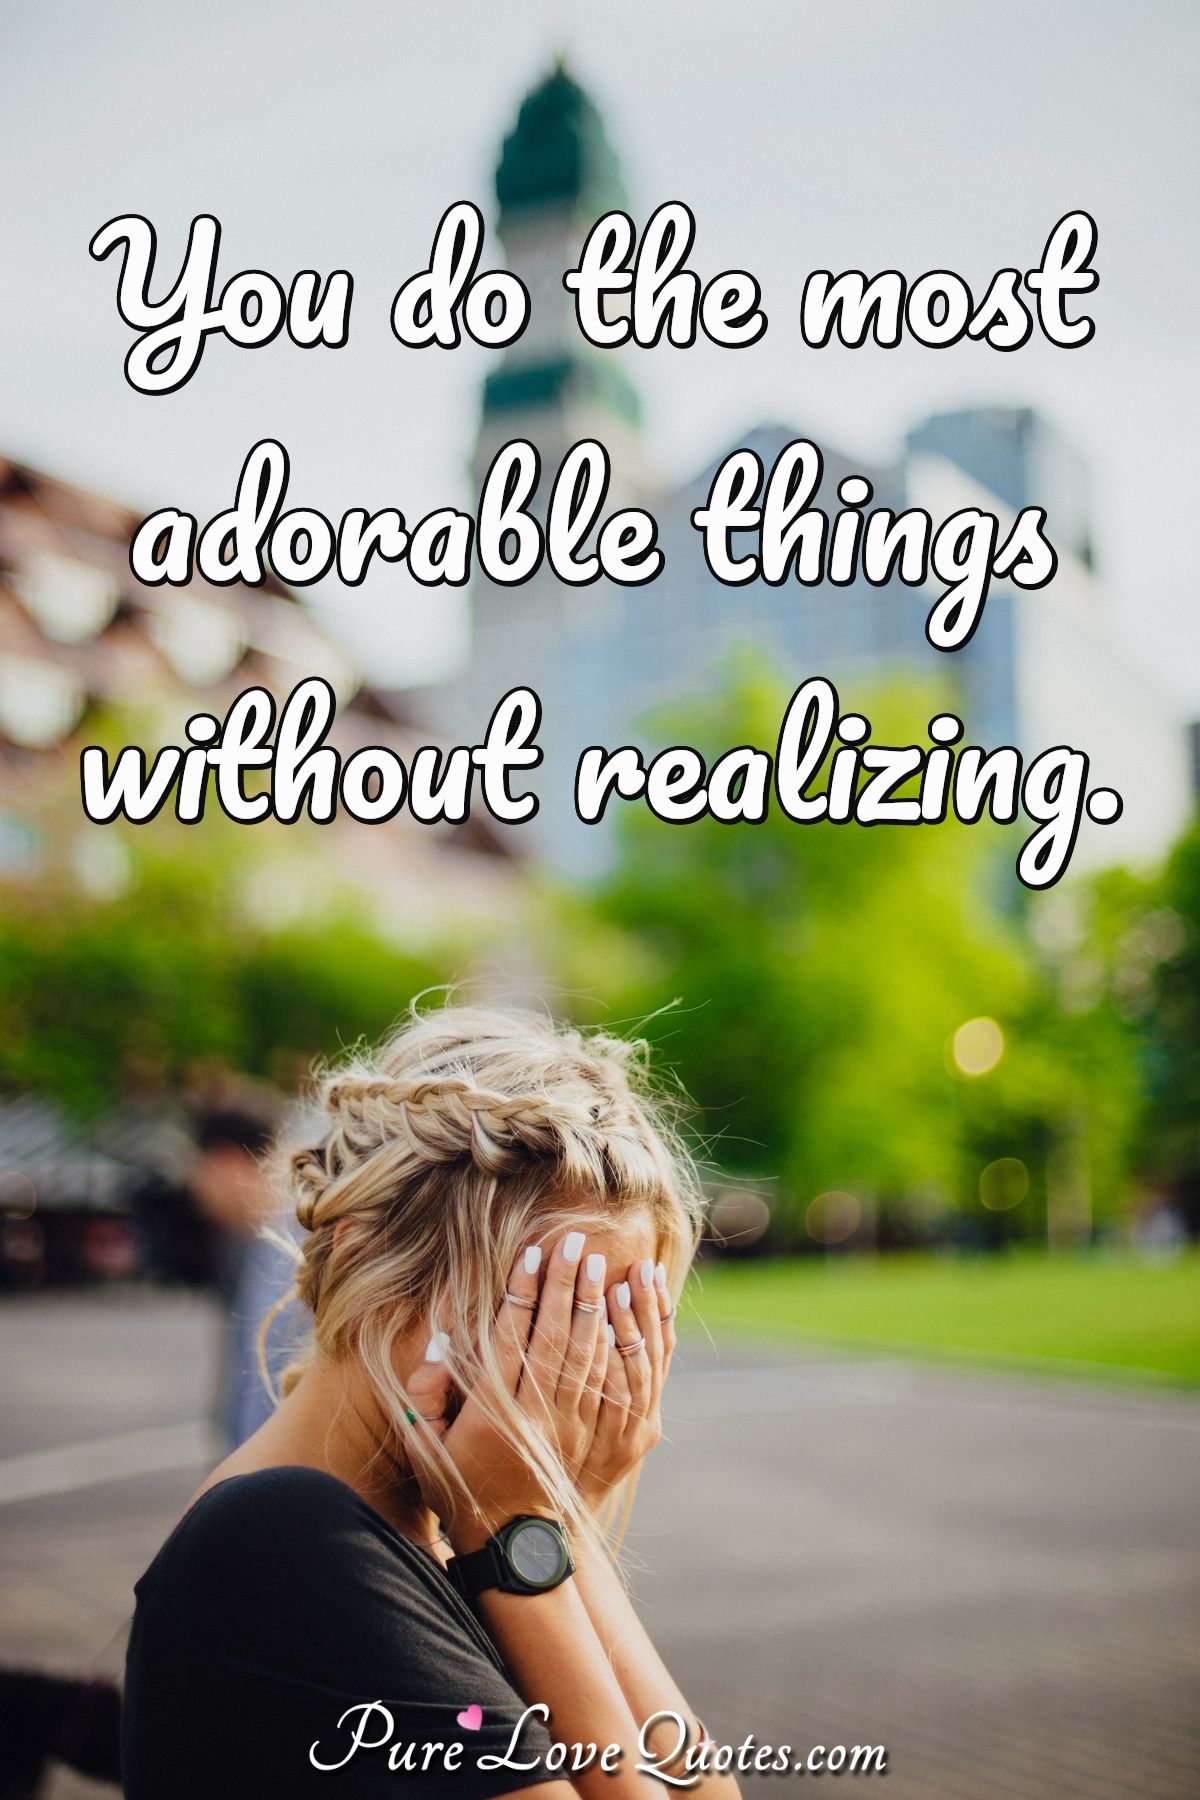 You do the most adorable things without realizing. - Anonymous